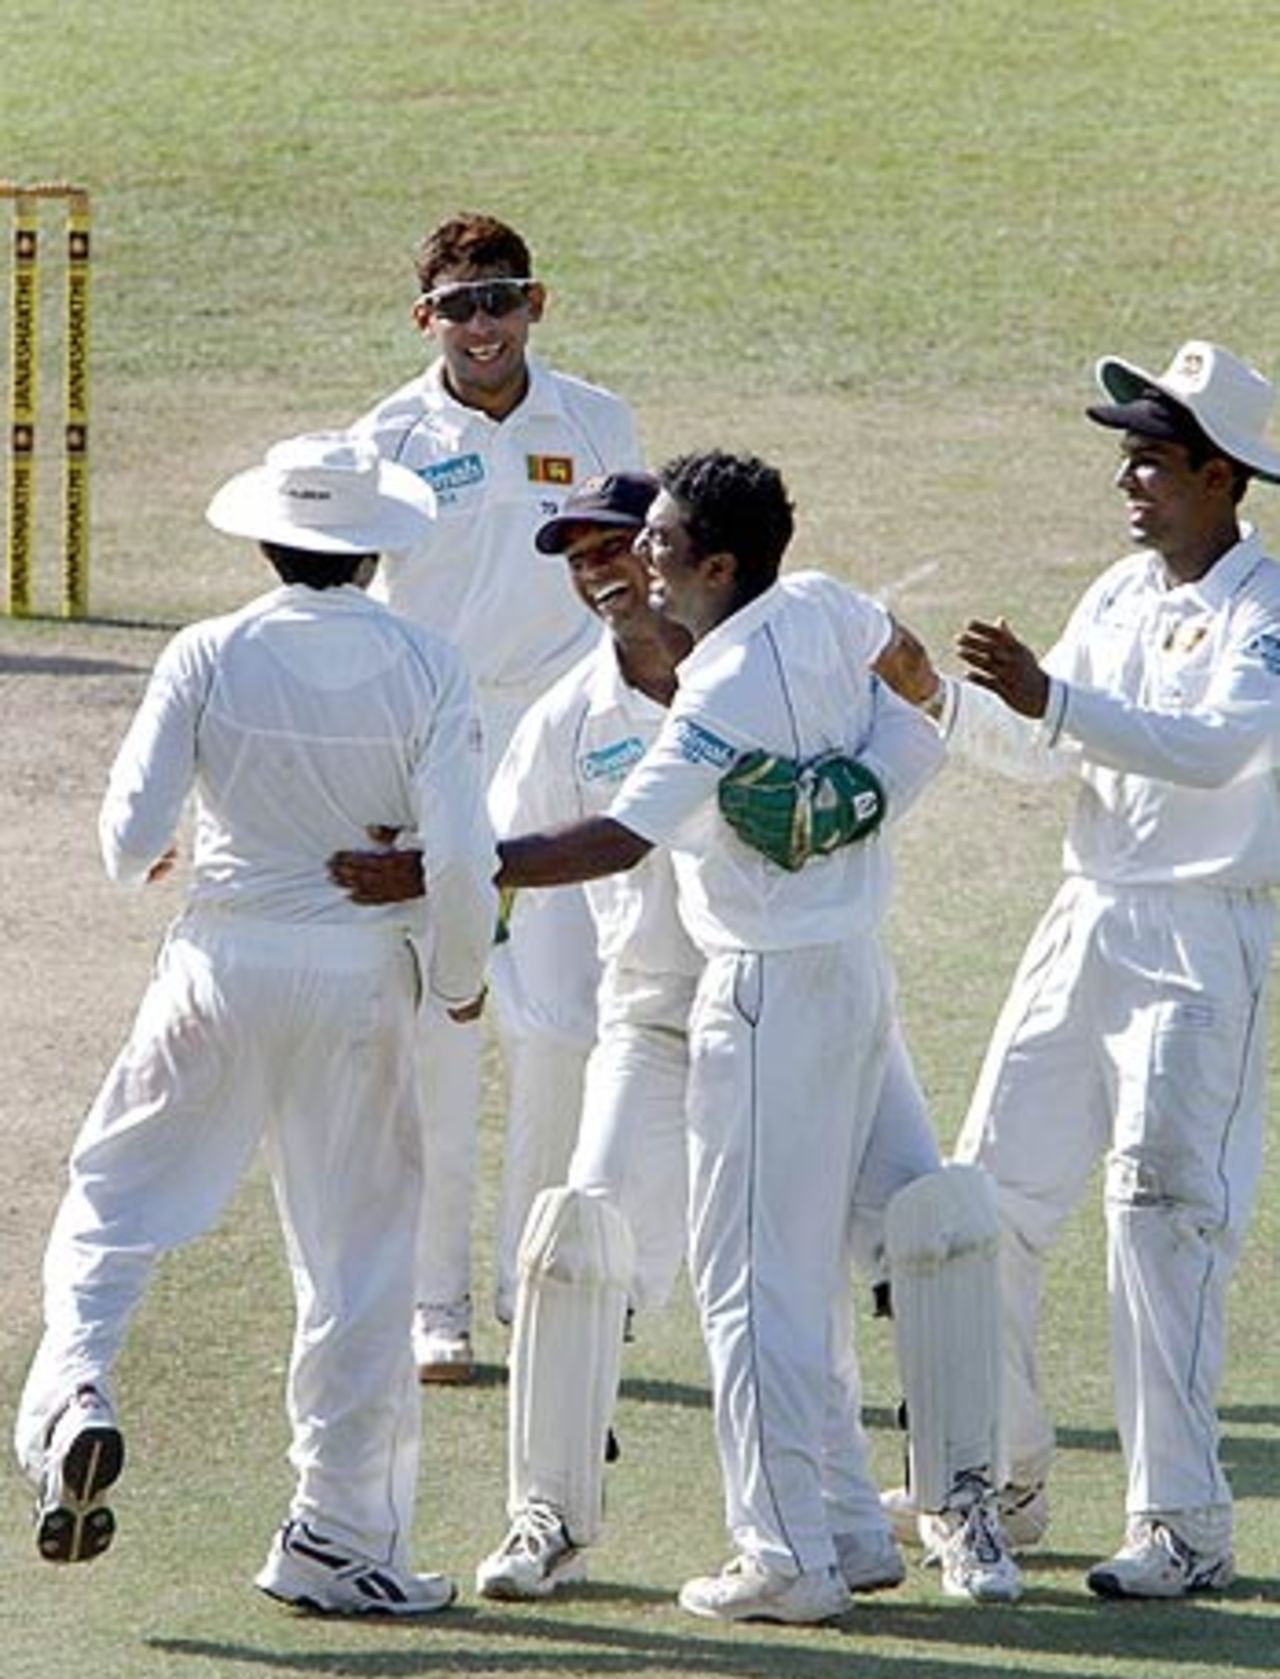 Joy for Muttiah Muralitharan and his team-mates as AB de Villiers is dismissed, Sri Lanka v South Africa, 1st Test, Colombo (SSC), 4th day, July 30 2006